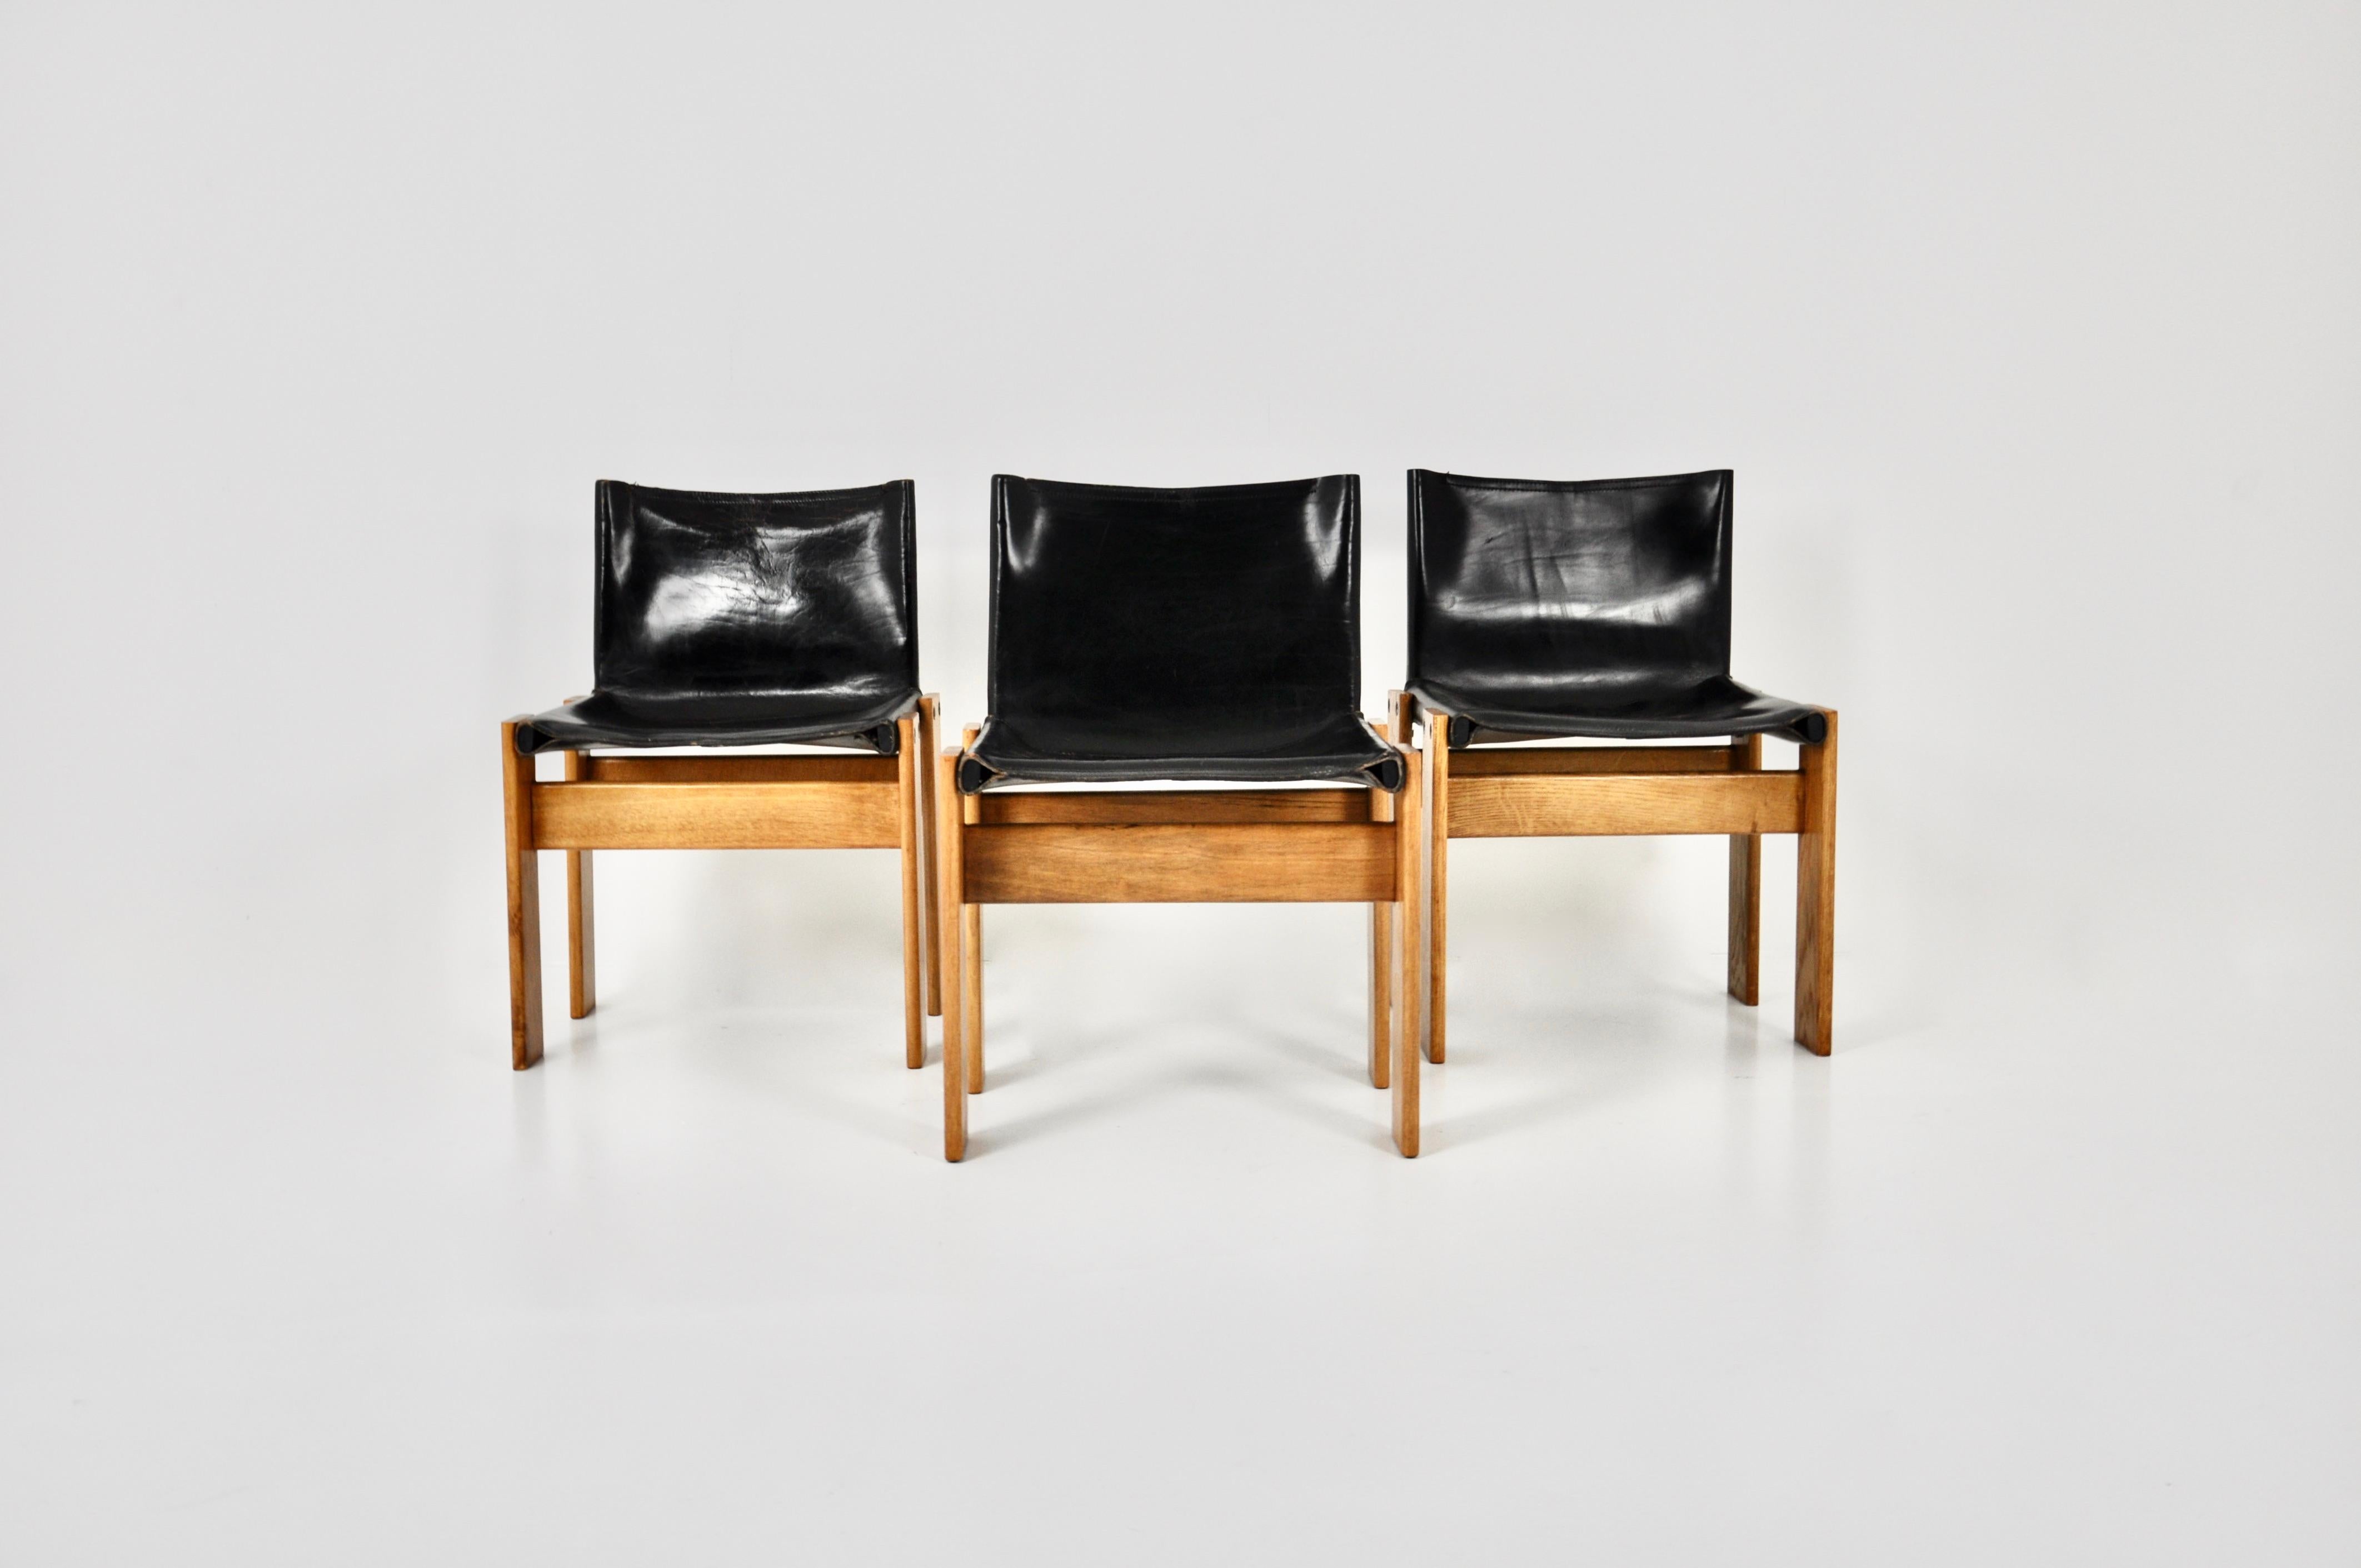 Set of 3 chairs in black leather and wood. Measure: Seat height: 42cm Wear due to time and age of the chairs.
 